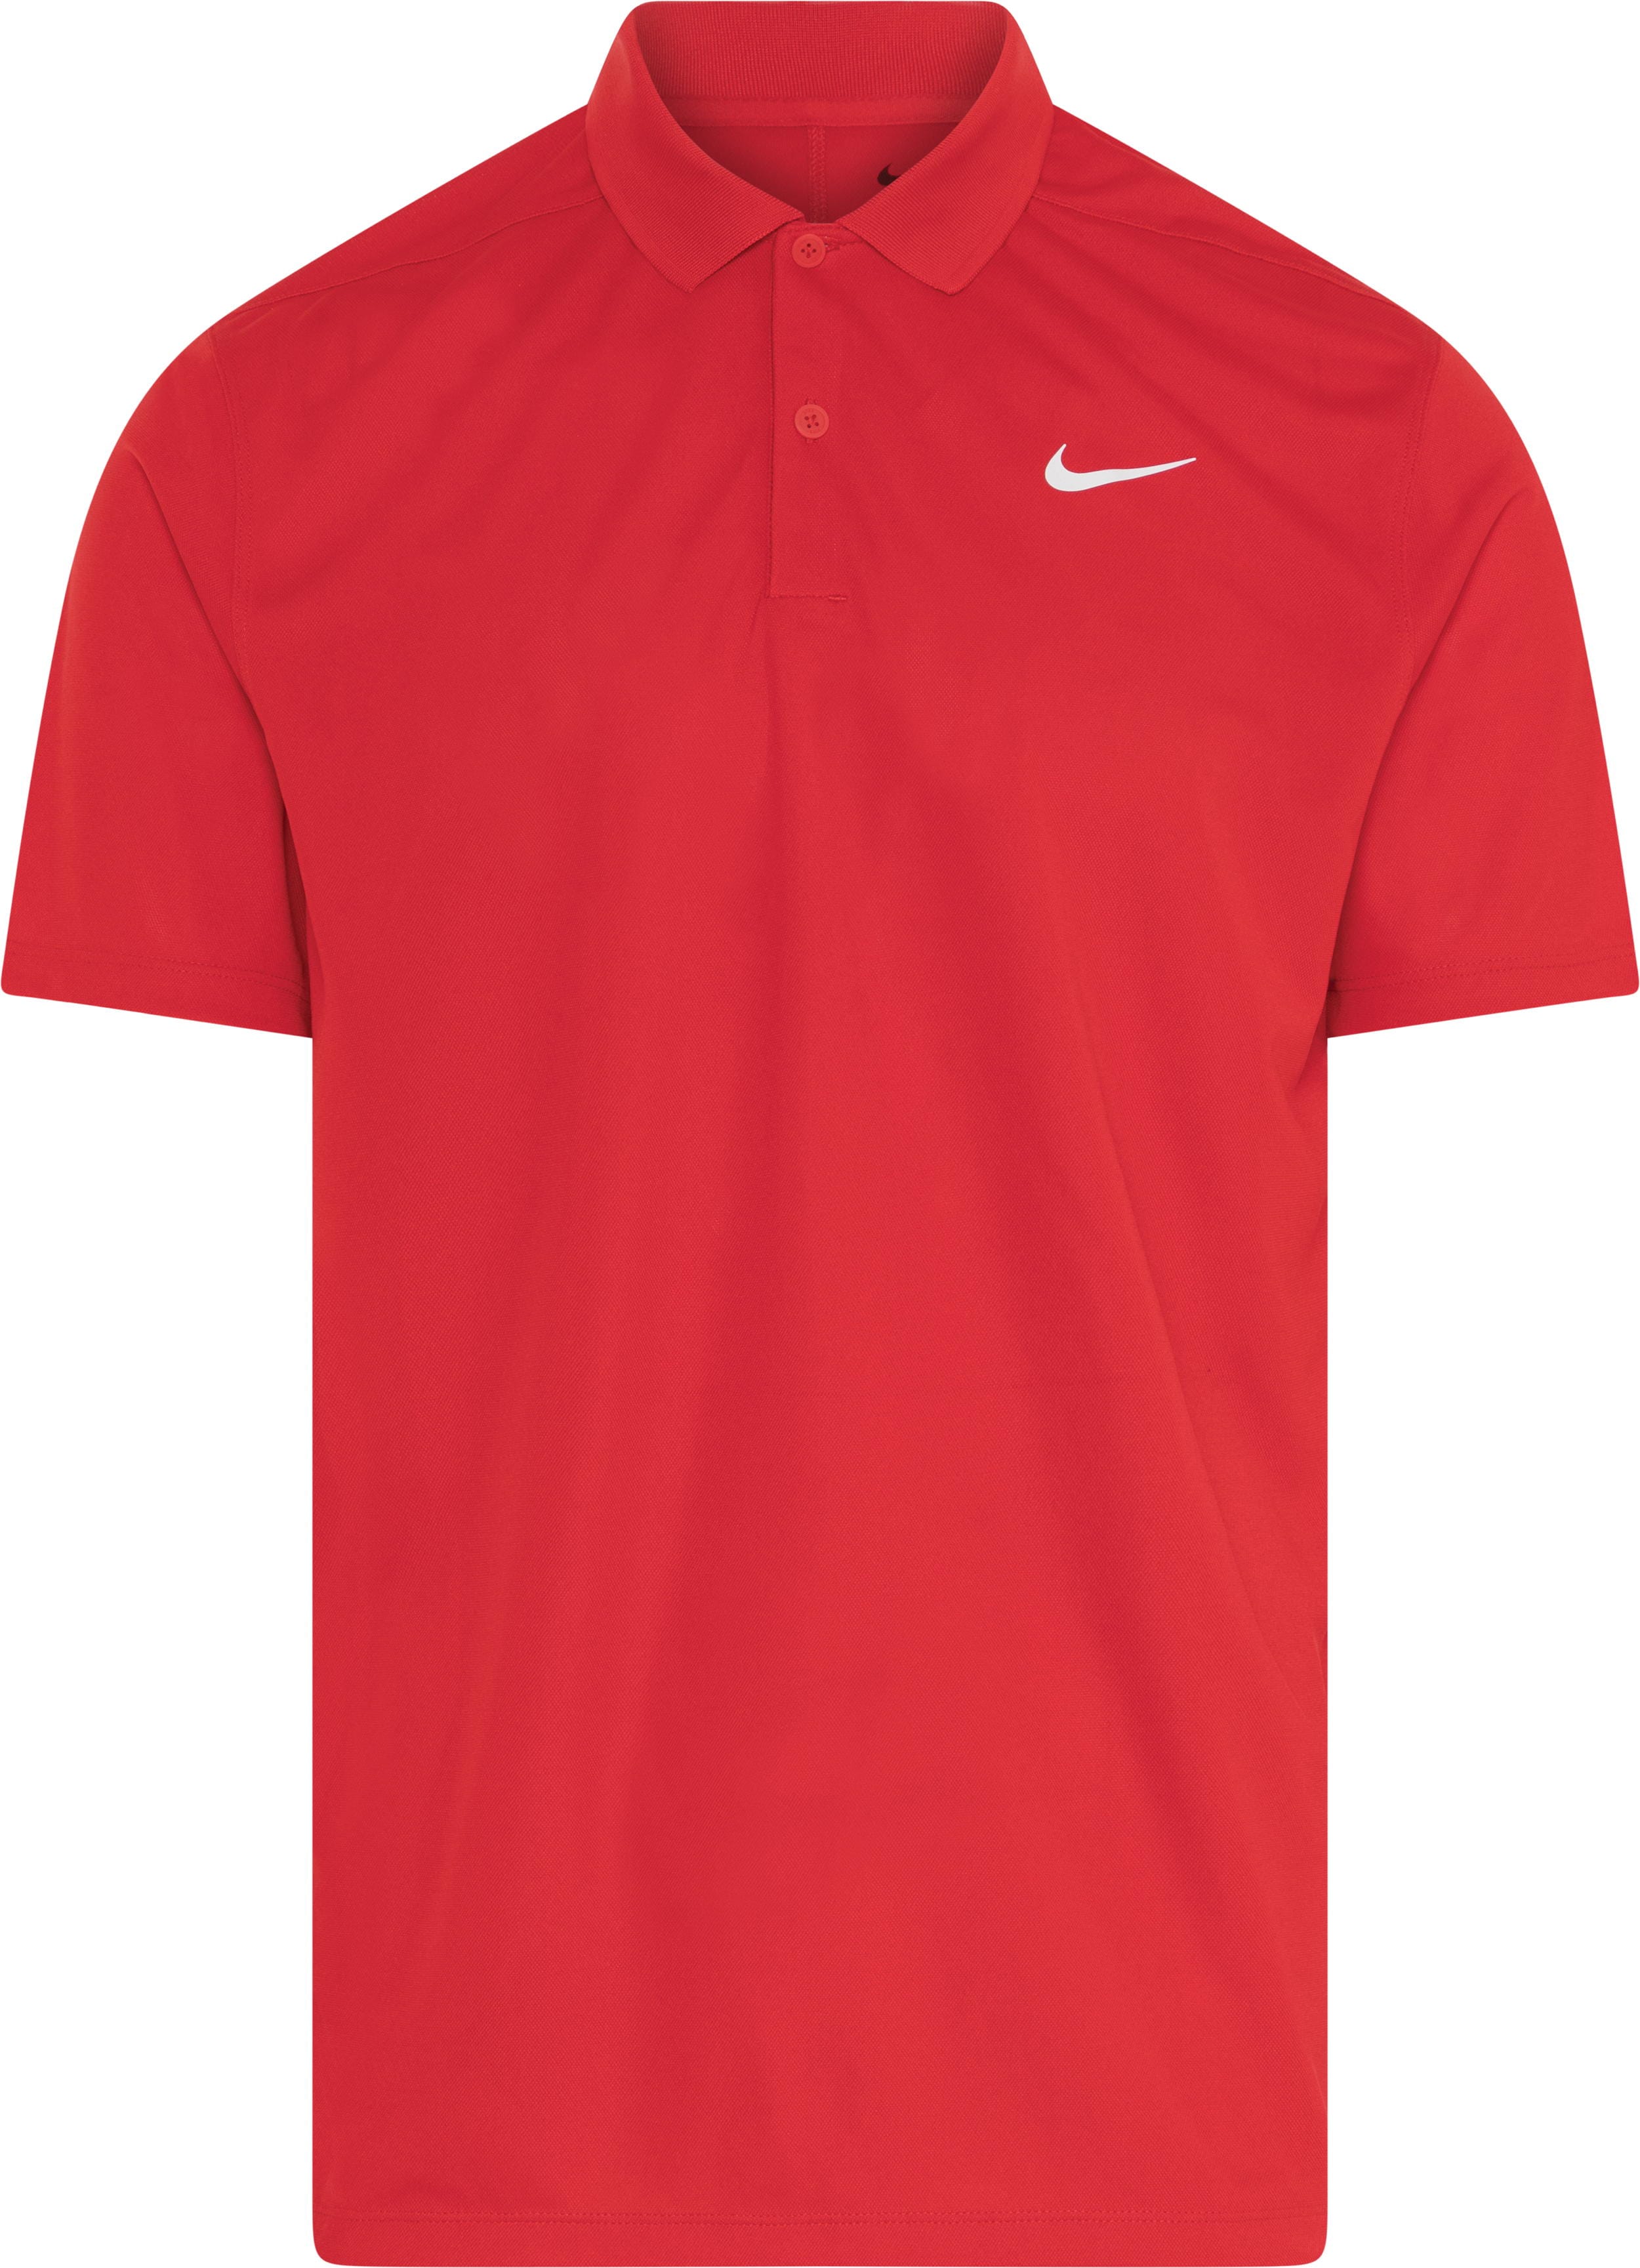 Nike Dri-Fit Victory Solid Polo, red/white